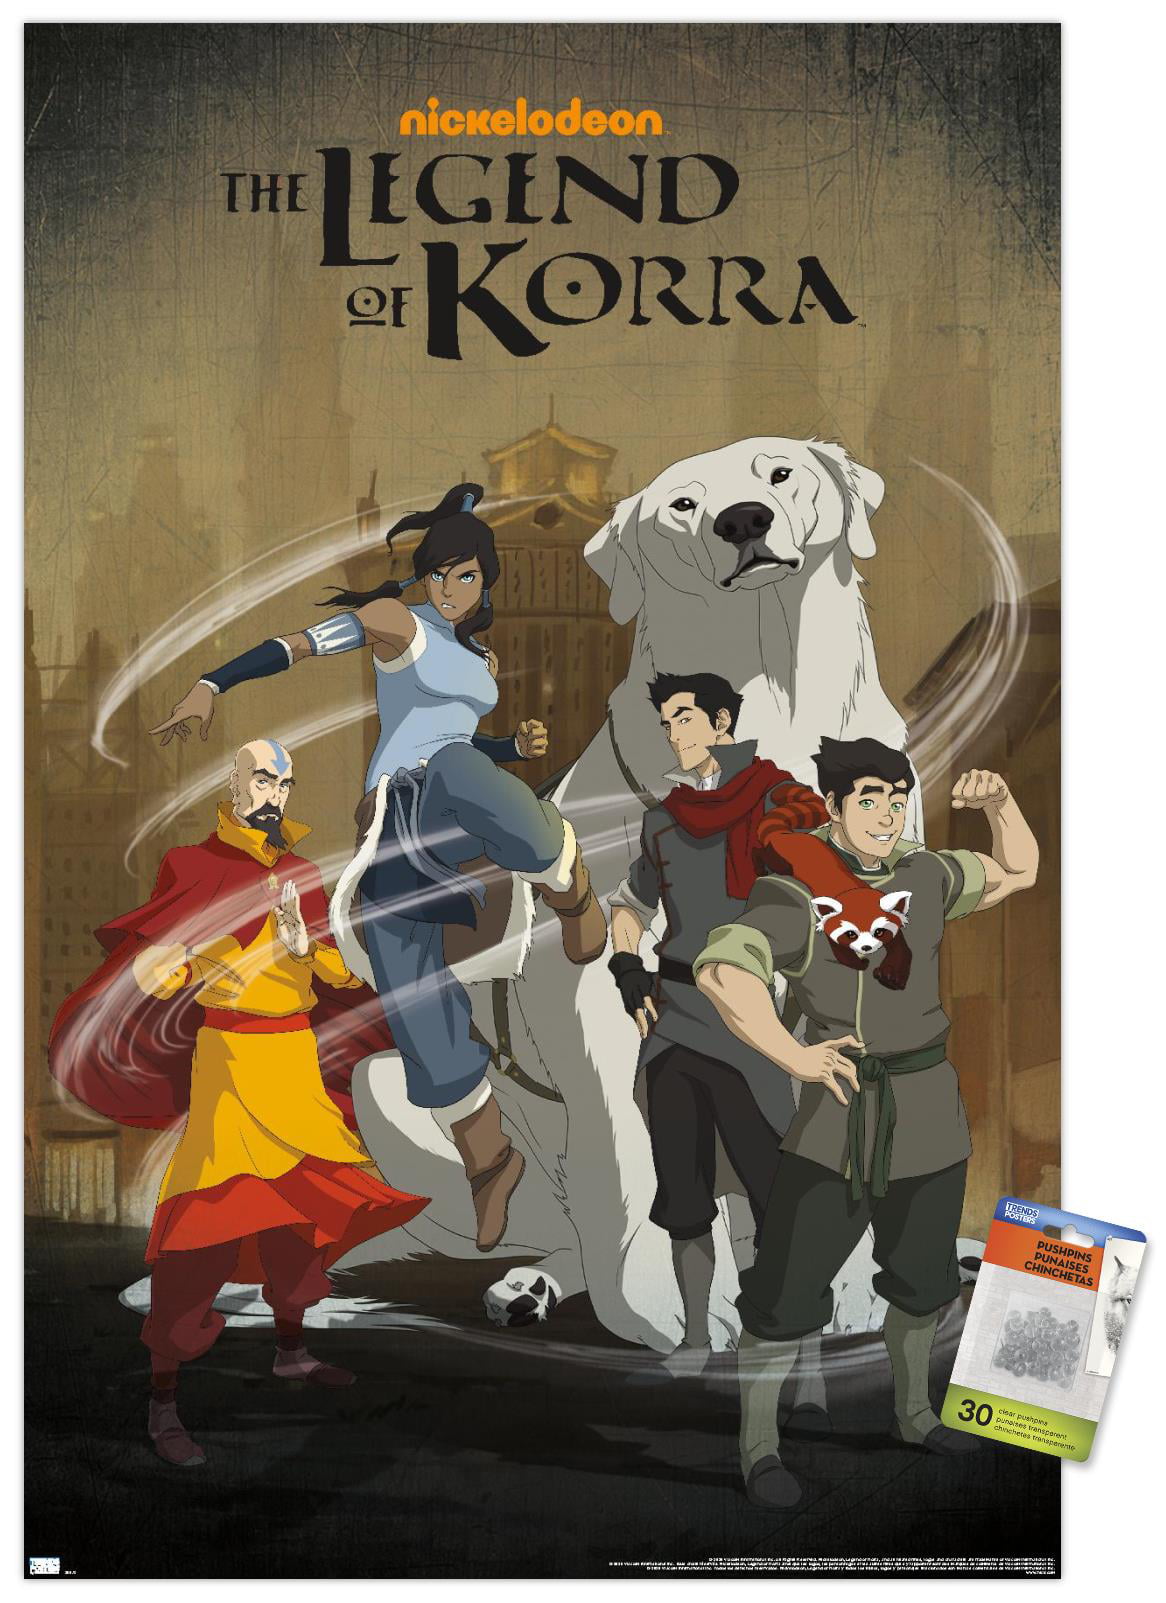 dawn redman recommends legend of korra pictures pic